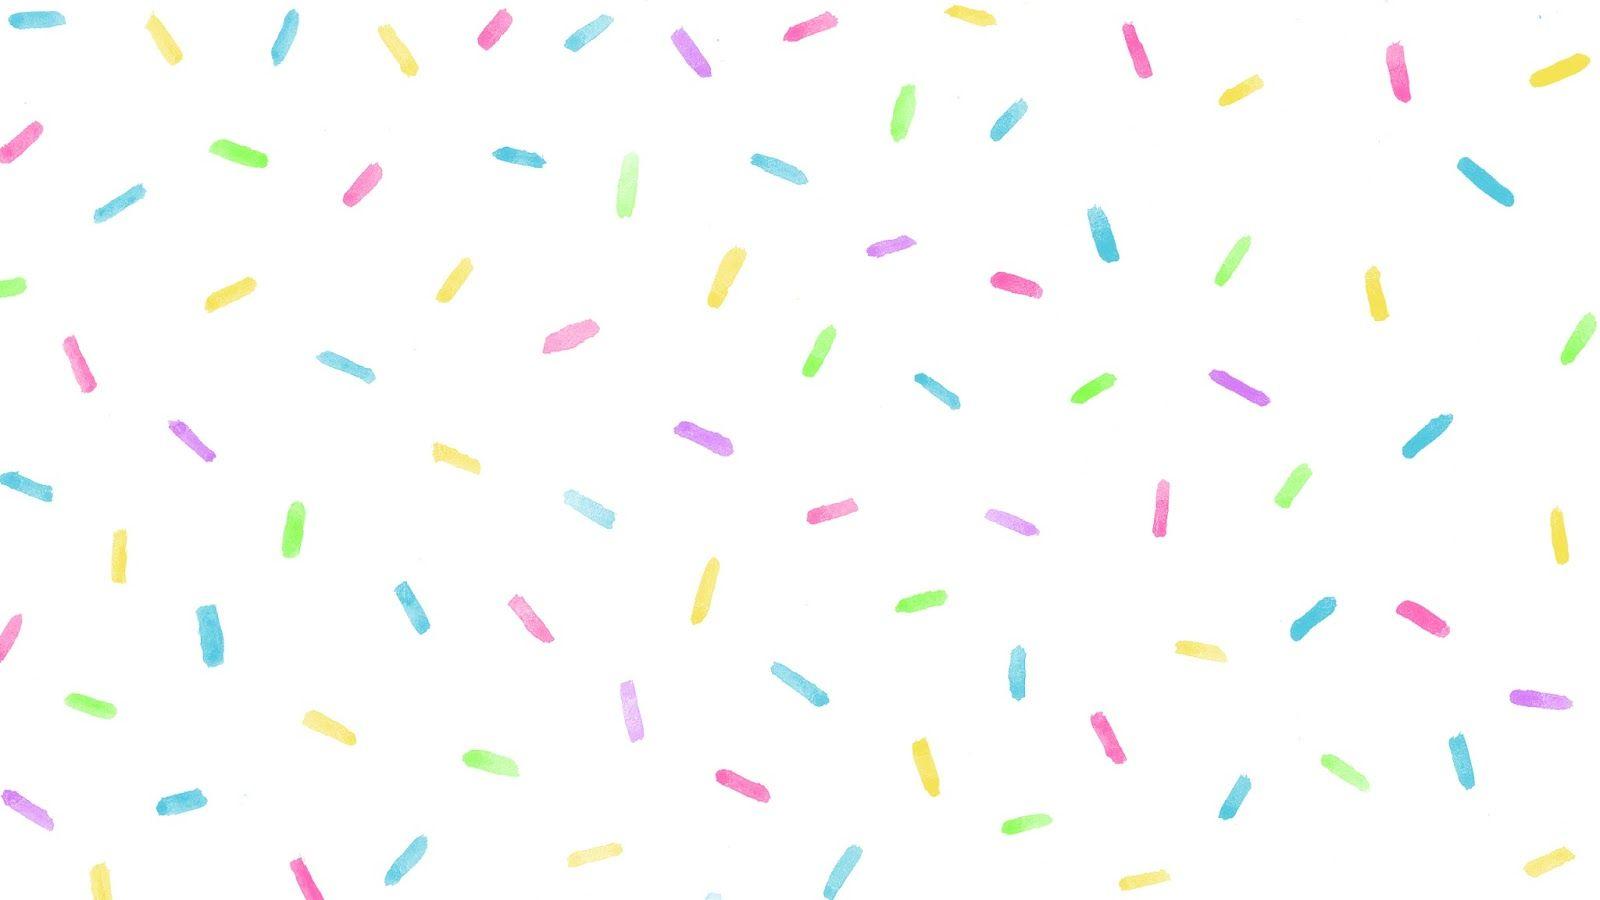 Drawn Dots Seamless Wallpaper Background Stock Illustration - Download  Image Now - Sugar Sprinkles, Backgrounds, Multi Colored - iStock